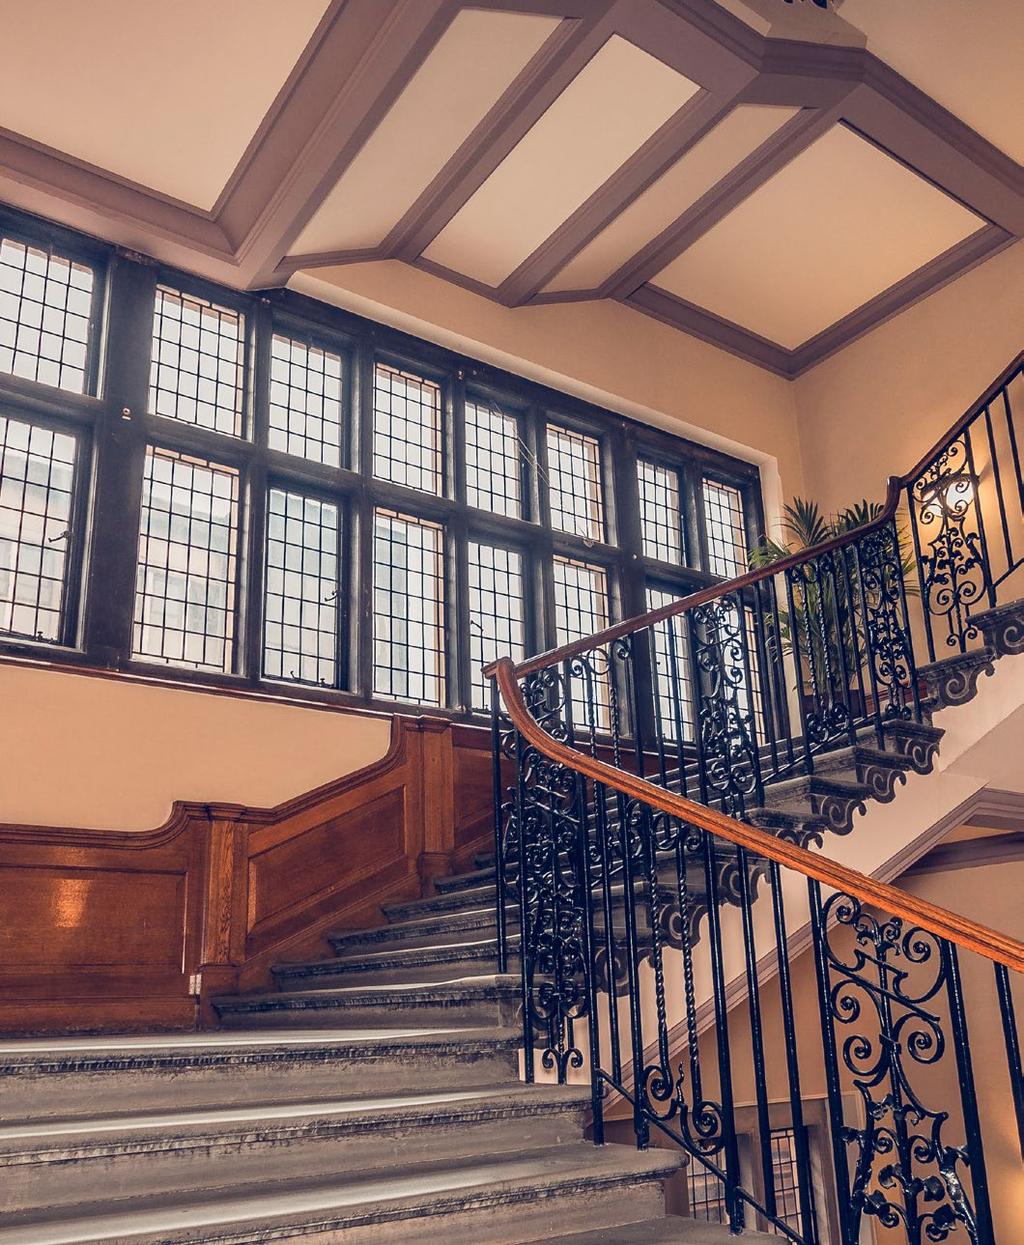 HERITAGE HERITAGE HERITAGE Built in 1906, The Grand boasts a stately character, with sweeping stone staircases, original wood panelling, parquet flooring and acres of marble.